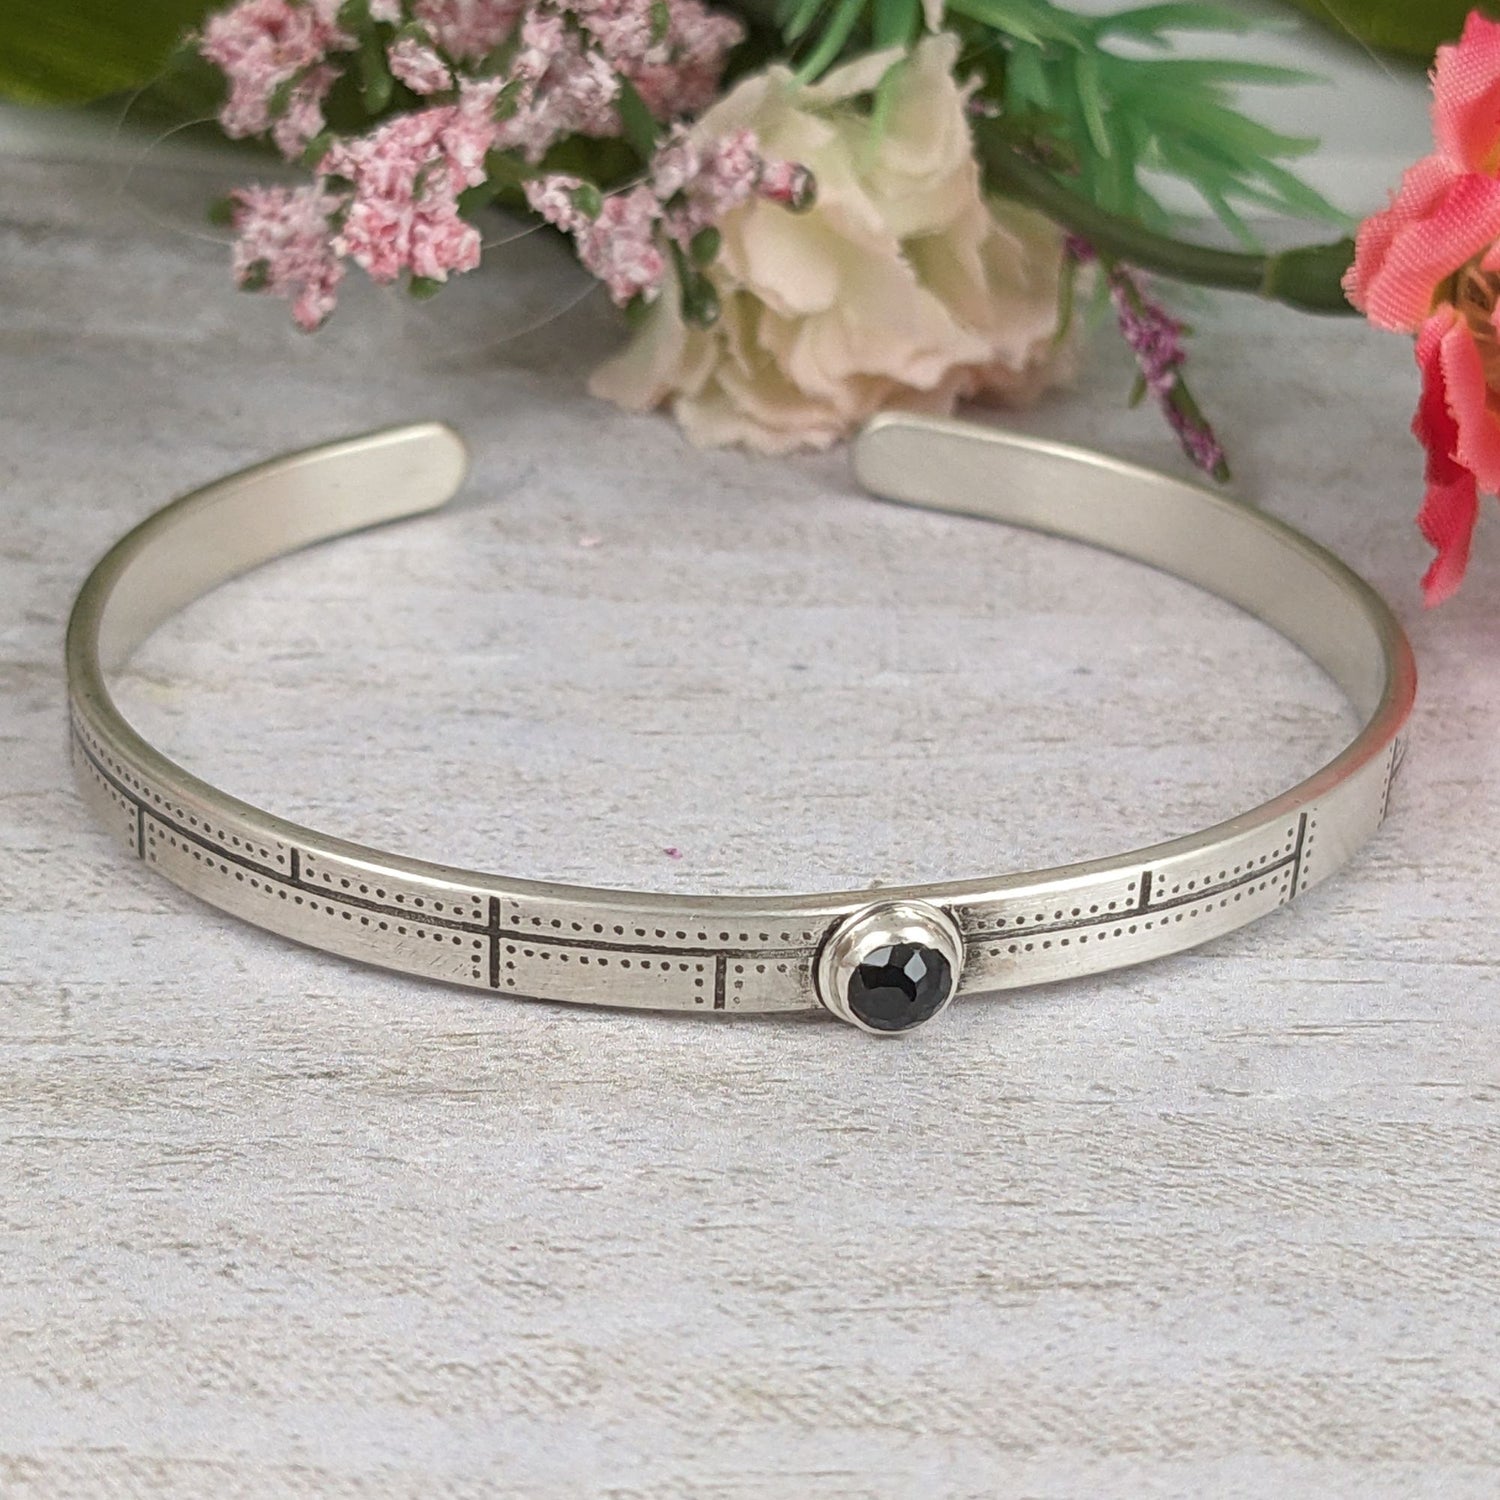 Narrow sterling silver cuff bracelet. The bracelet has a riveted panel design and features a rose cut black spinel gemstone. Staged with flowers in the background.